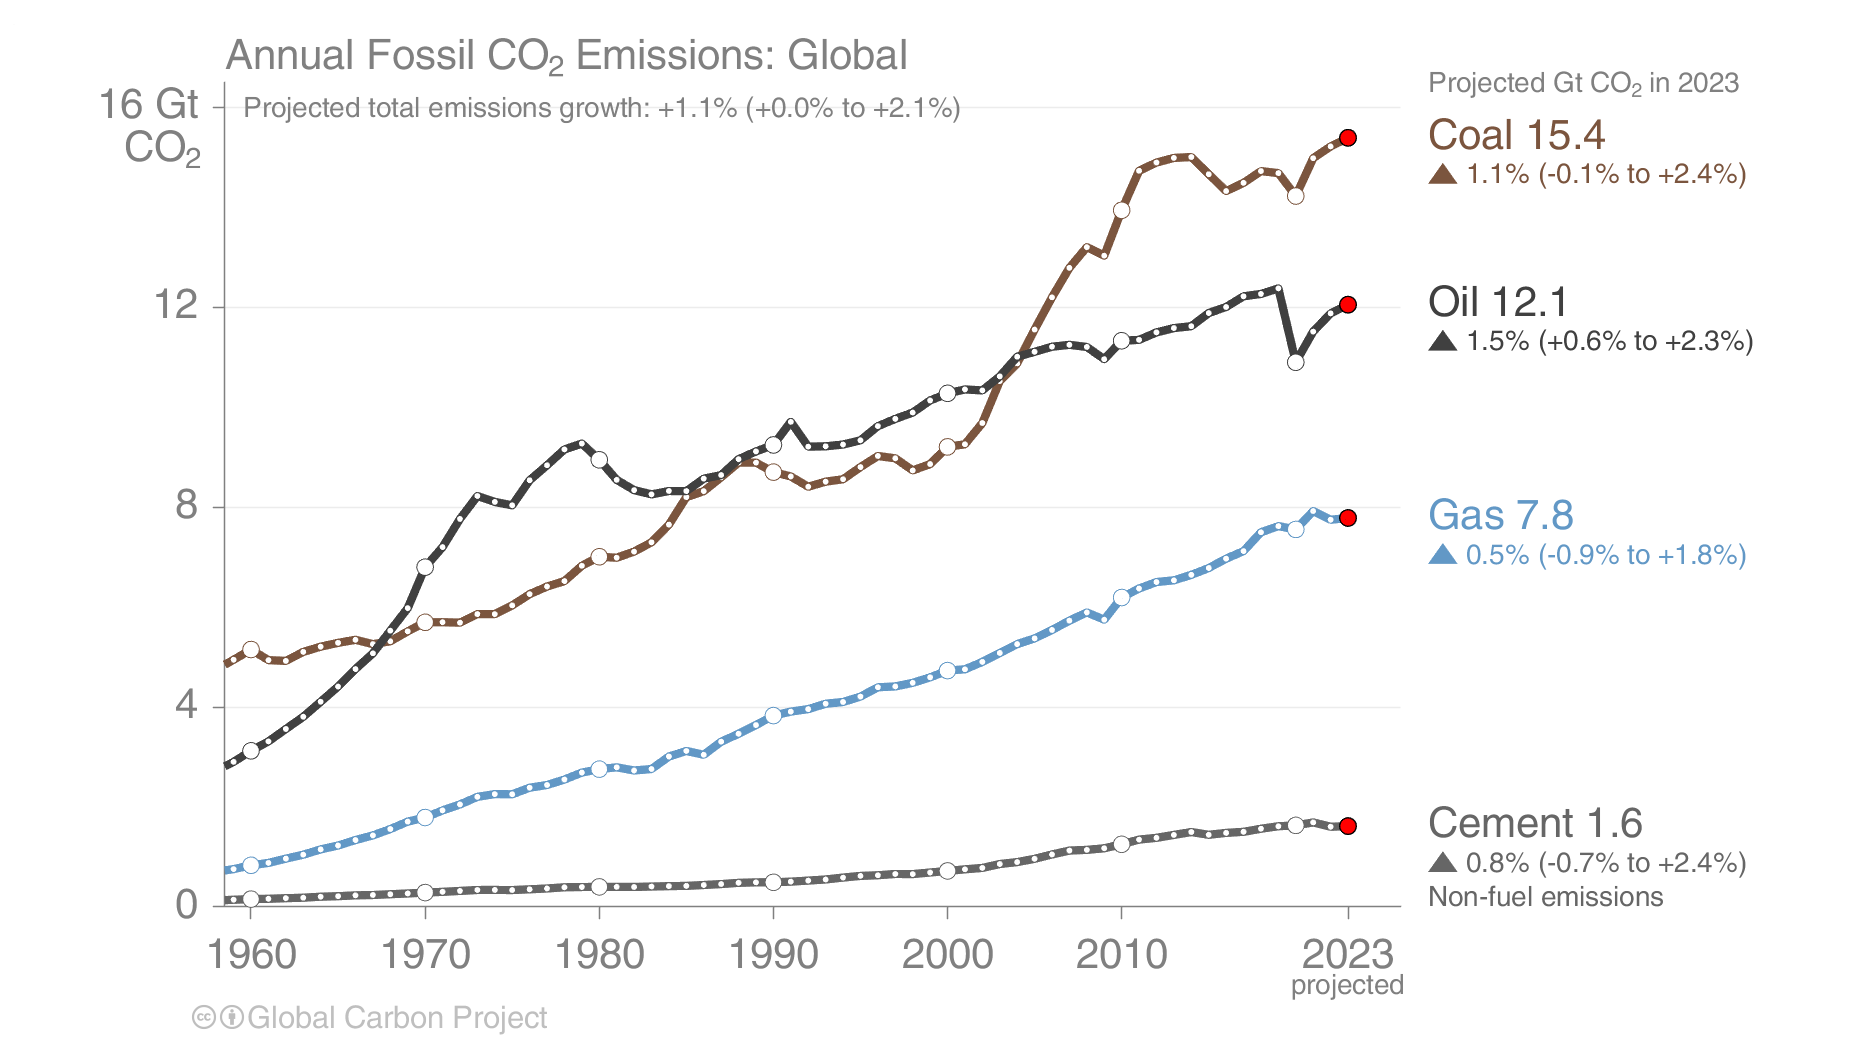 Global carbon emissions from fossil fuels to rise 1.1% to hit peak